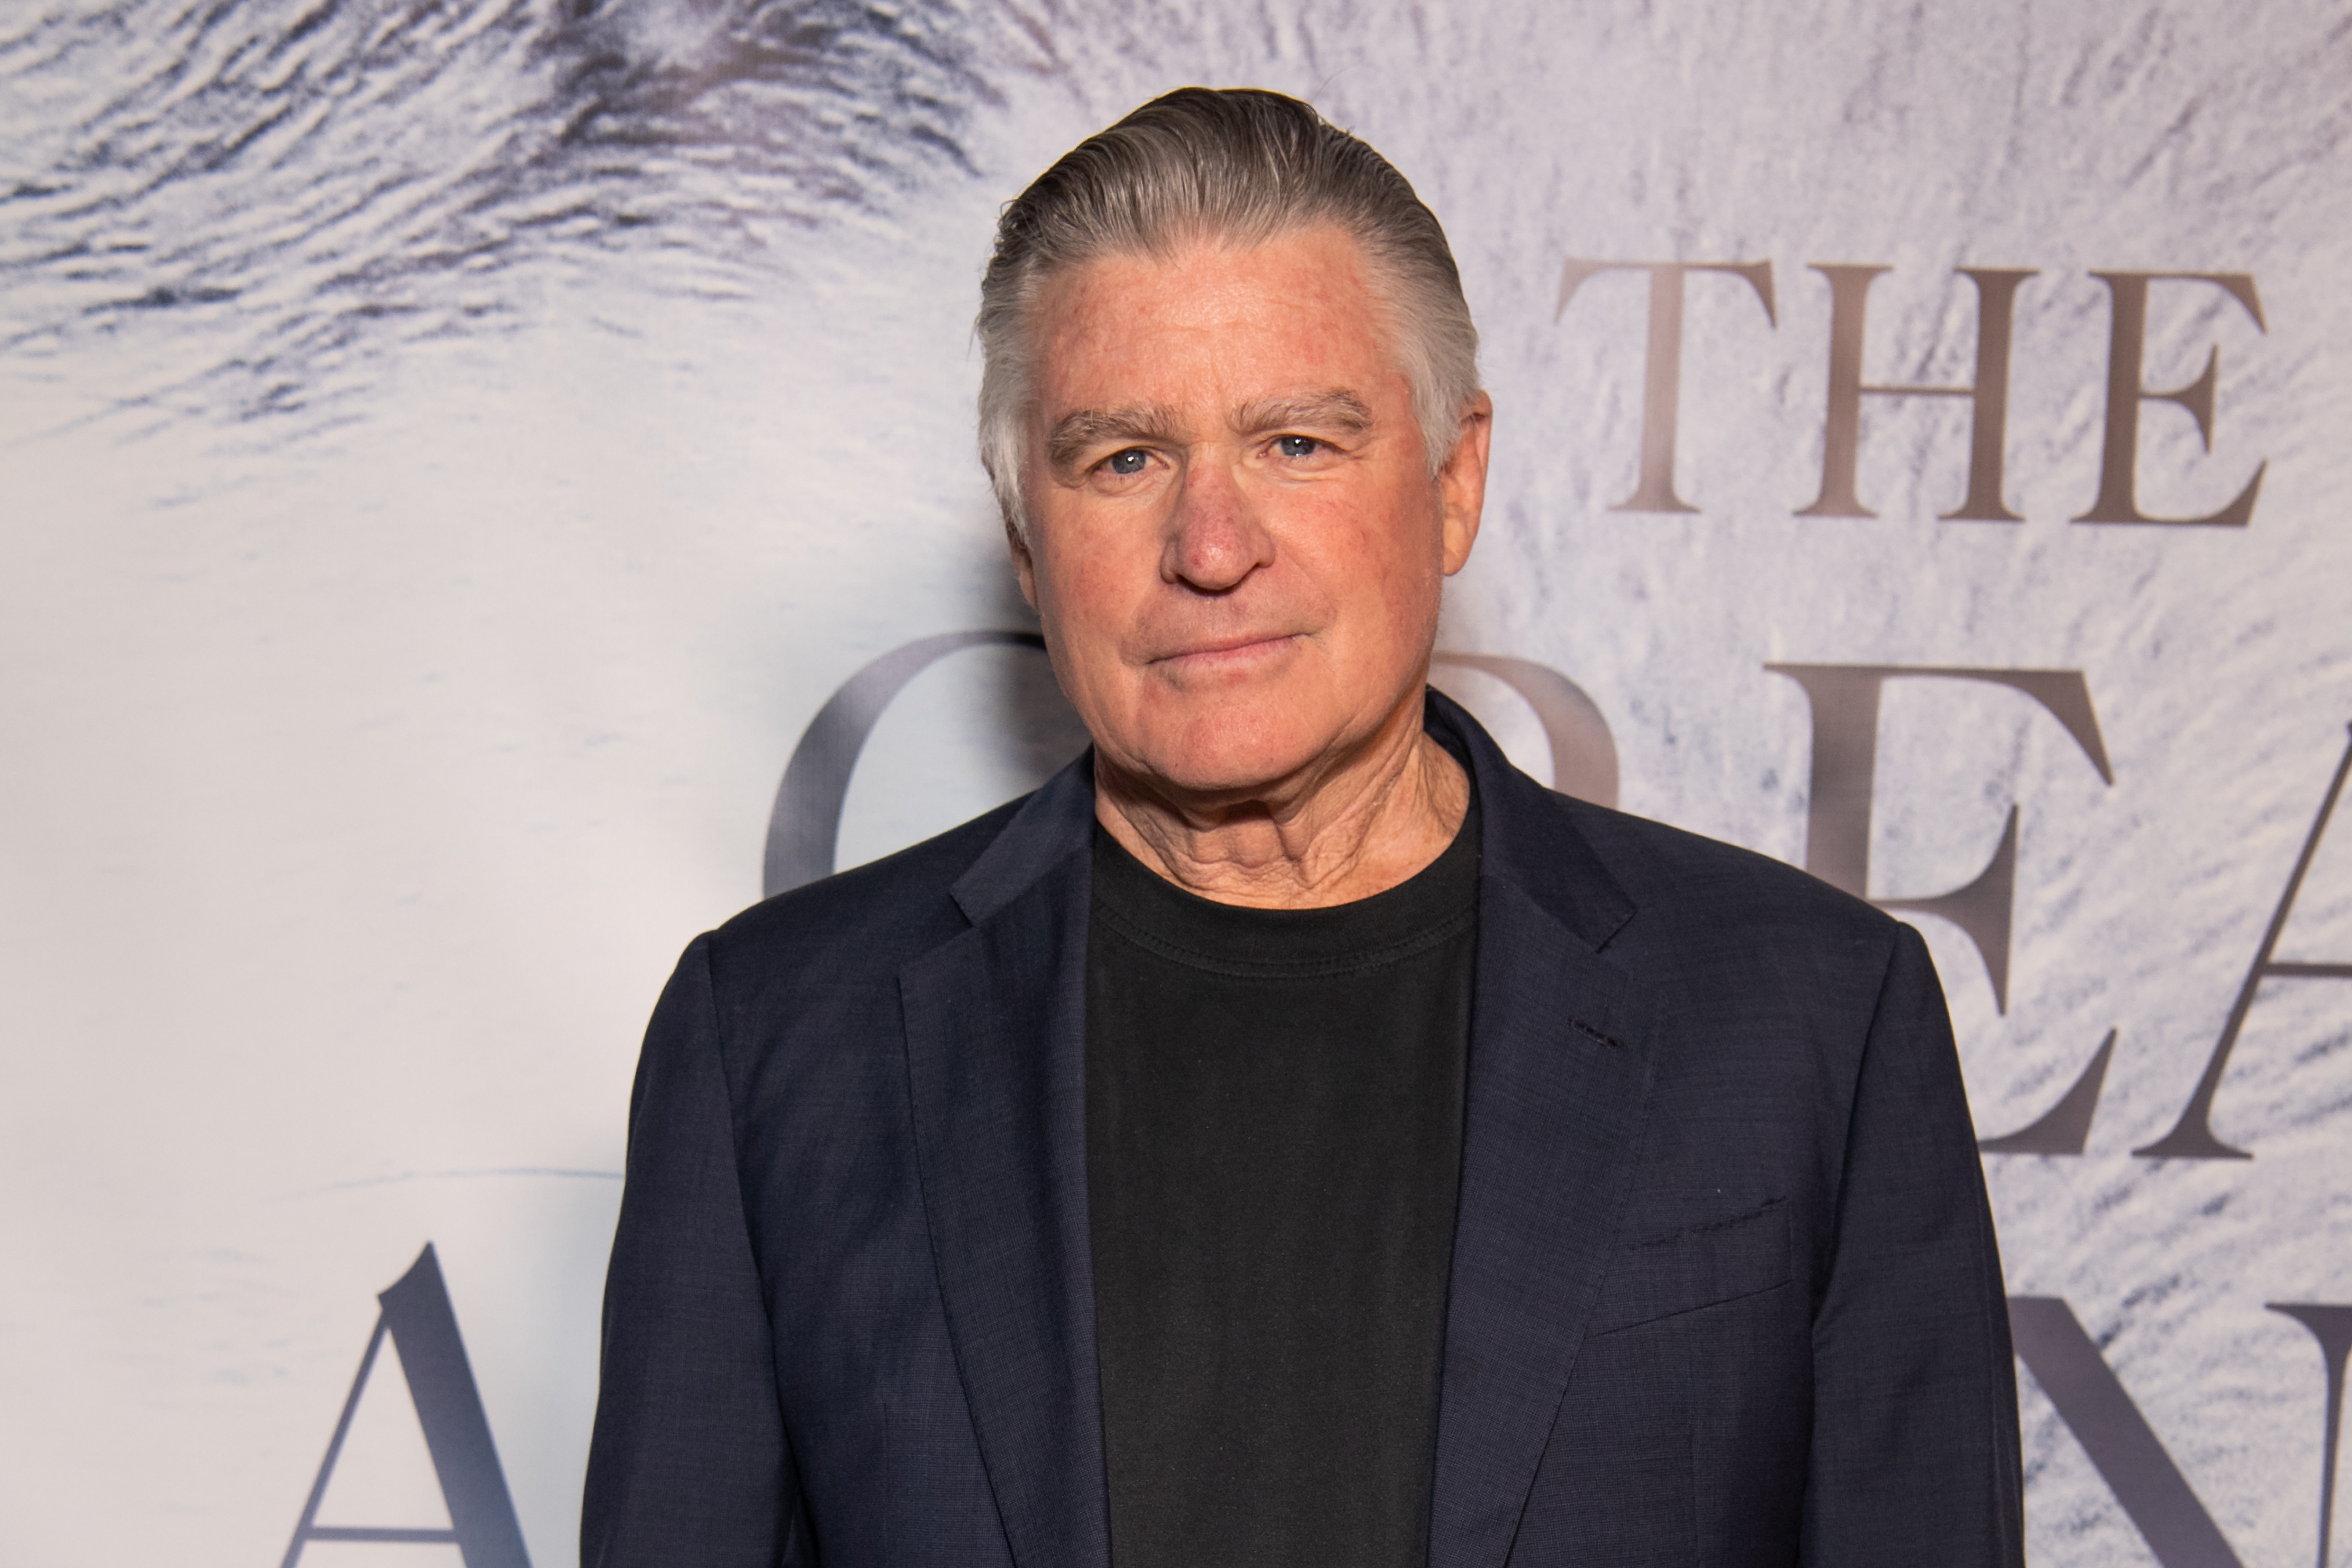 Treat Williams at the premiere of "The Great Alaskan Race," 2019 | Source: Getty Images